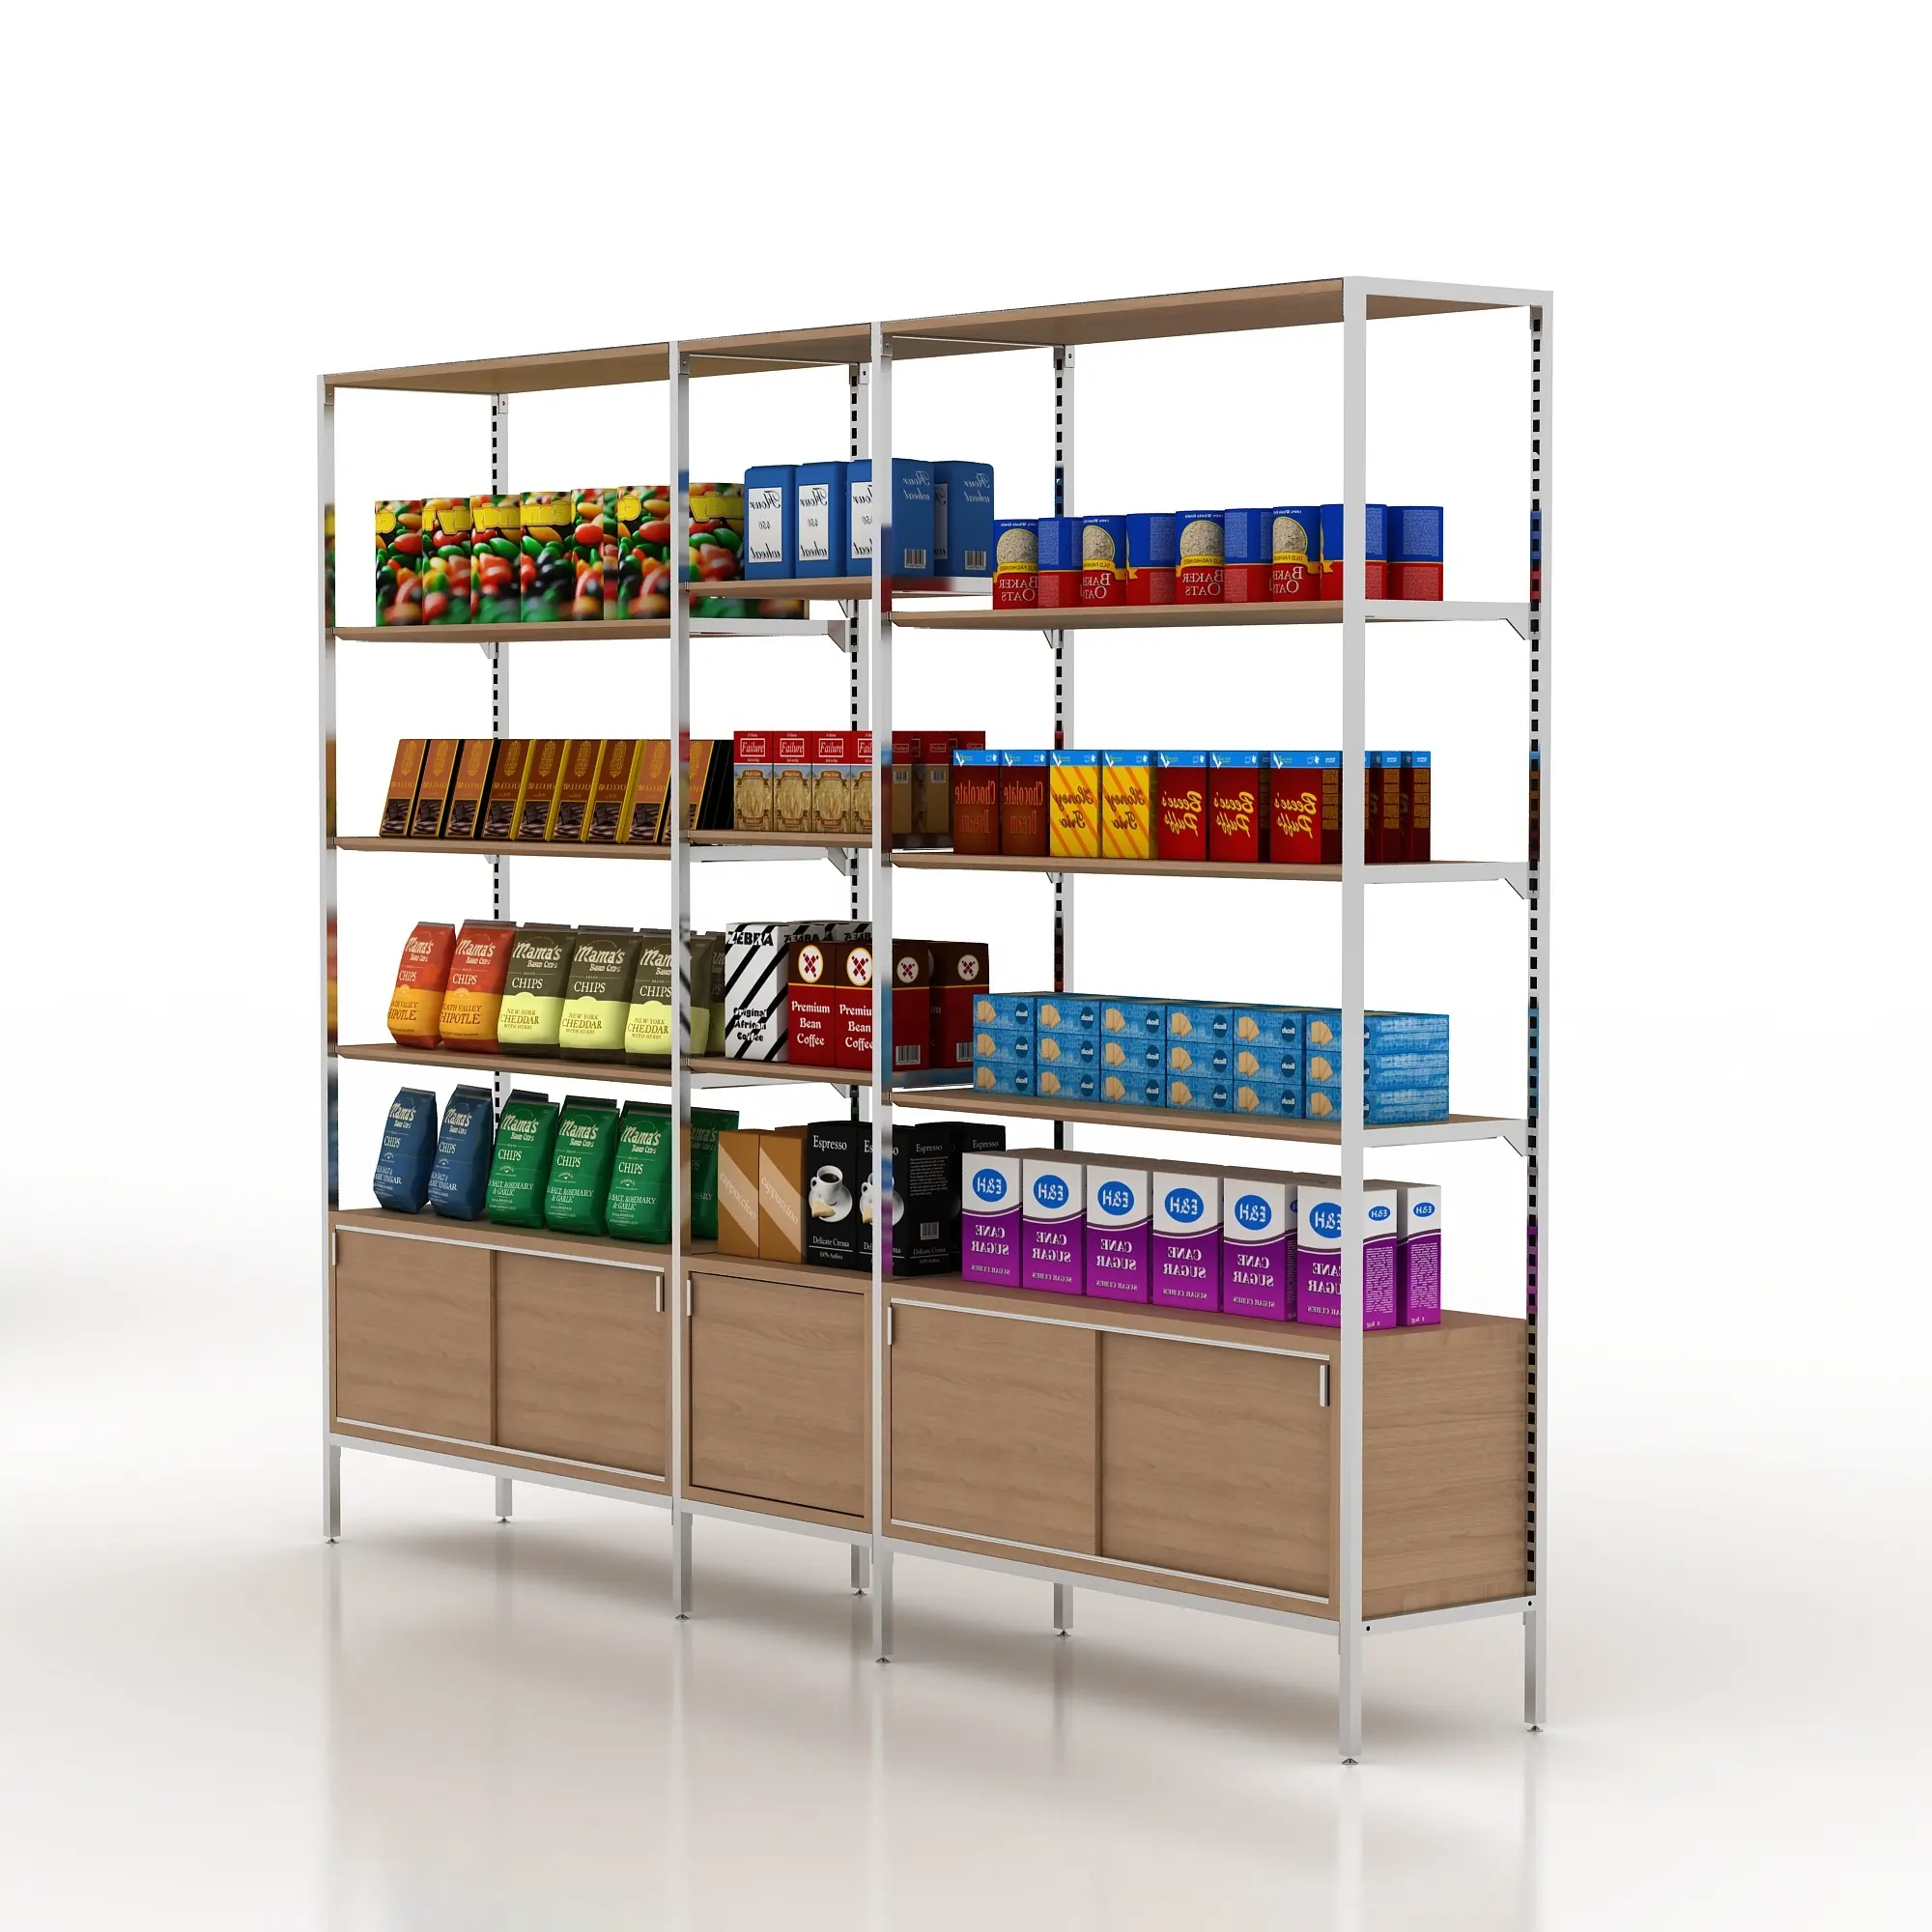 Oem factory chain fitting metal store fixtures wood modular coffee shop shelves and display cabinets for snack